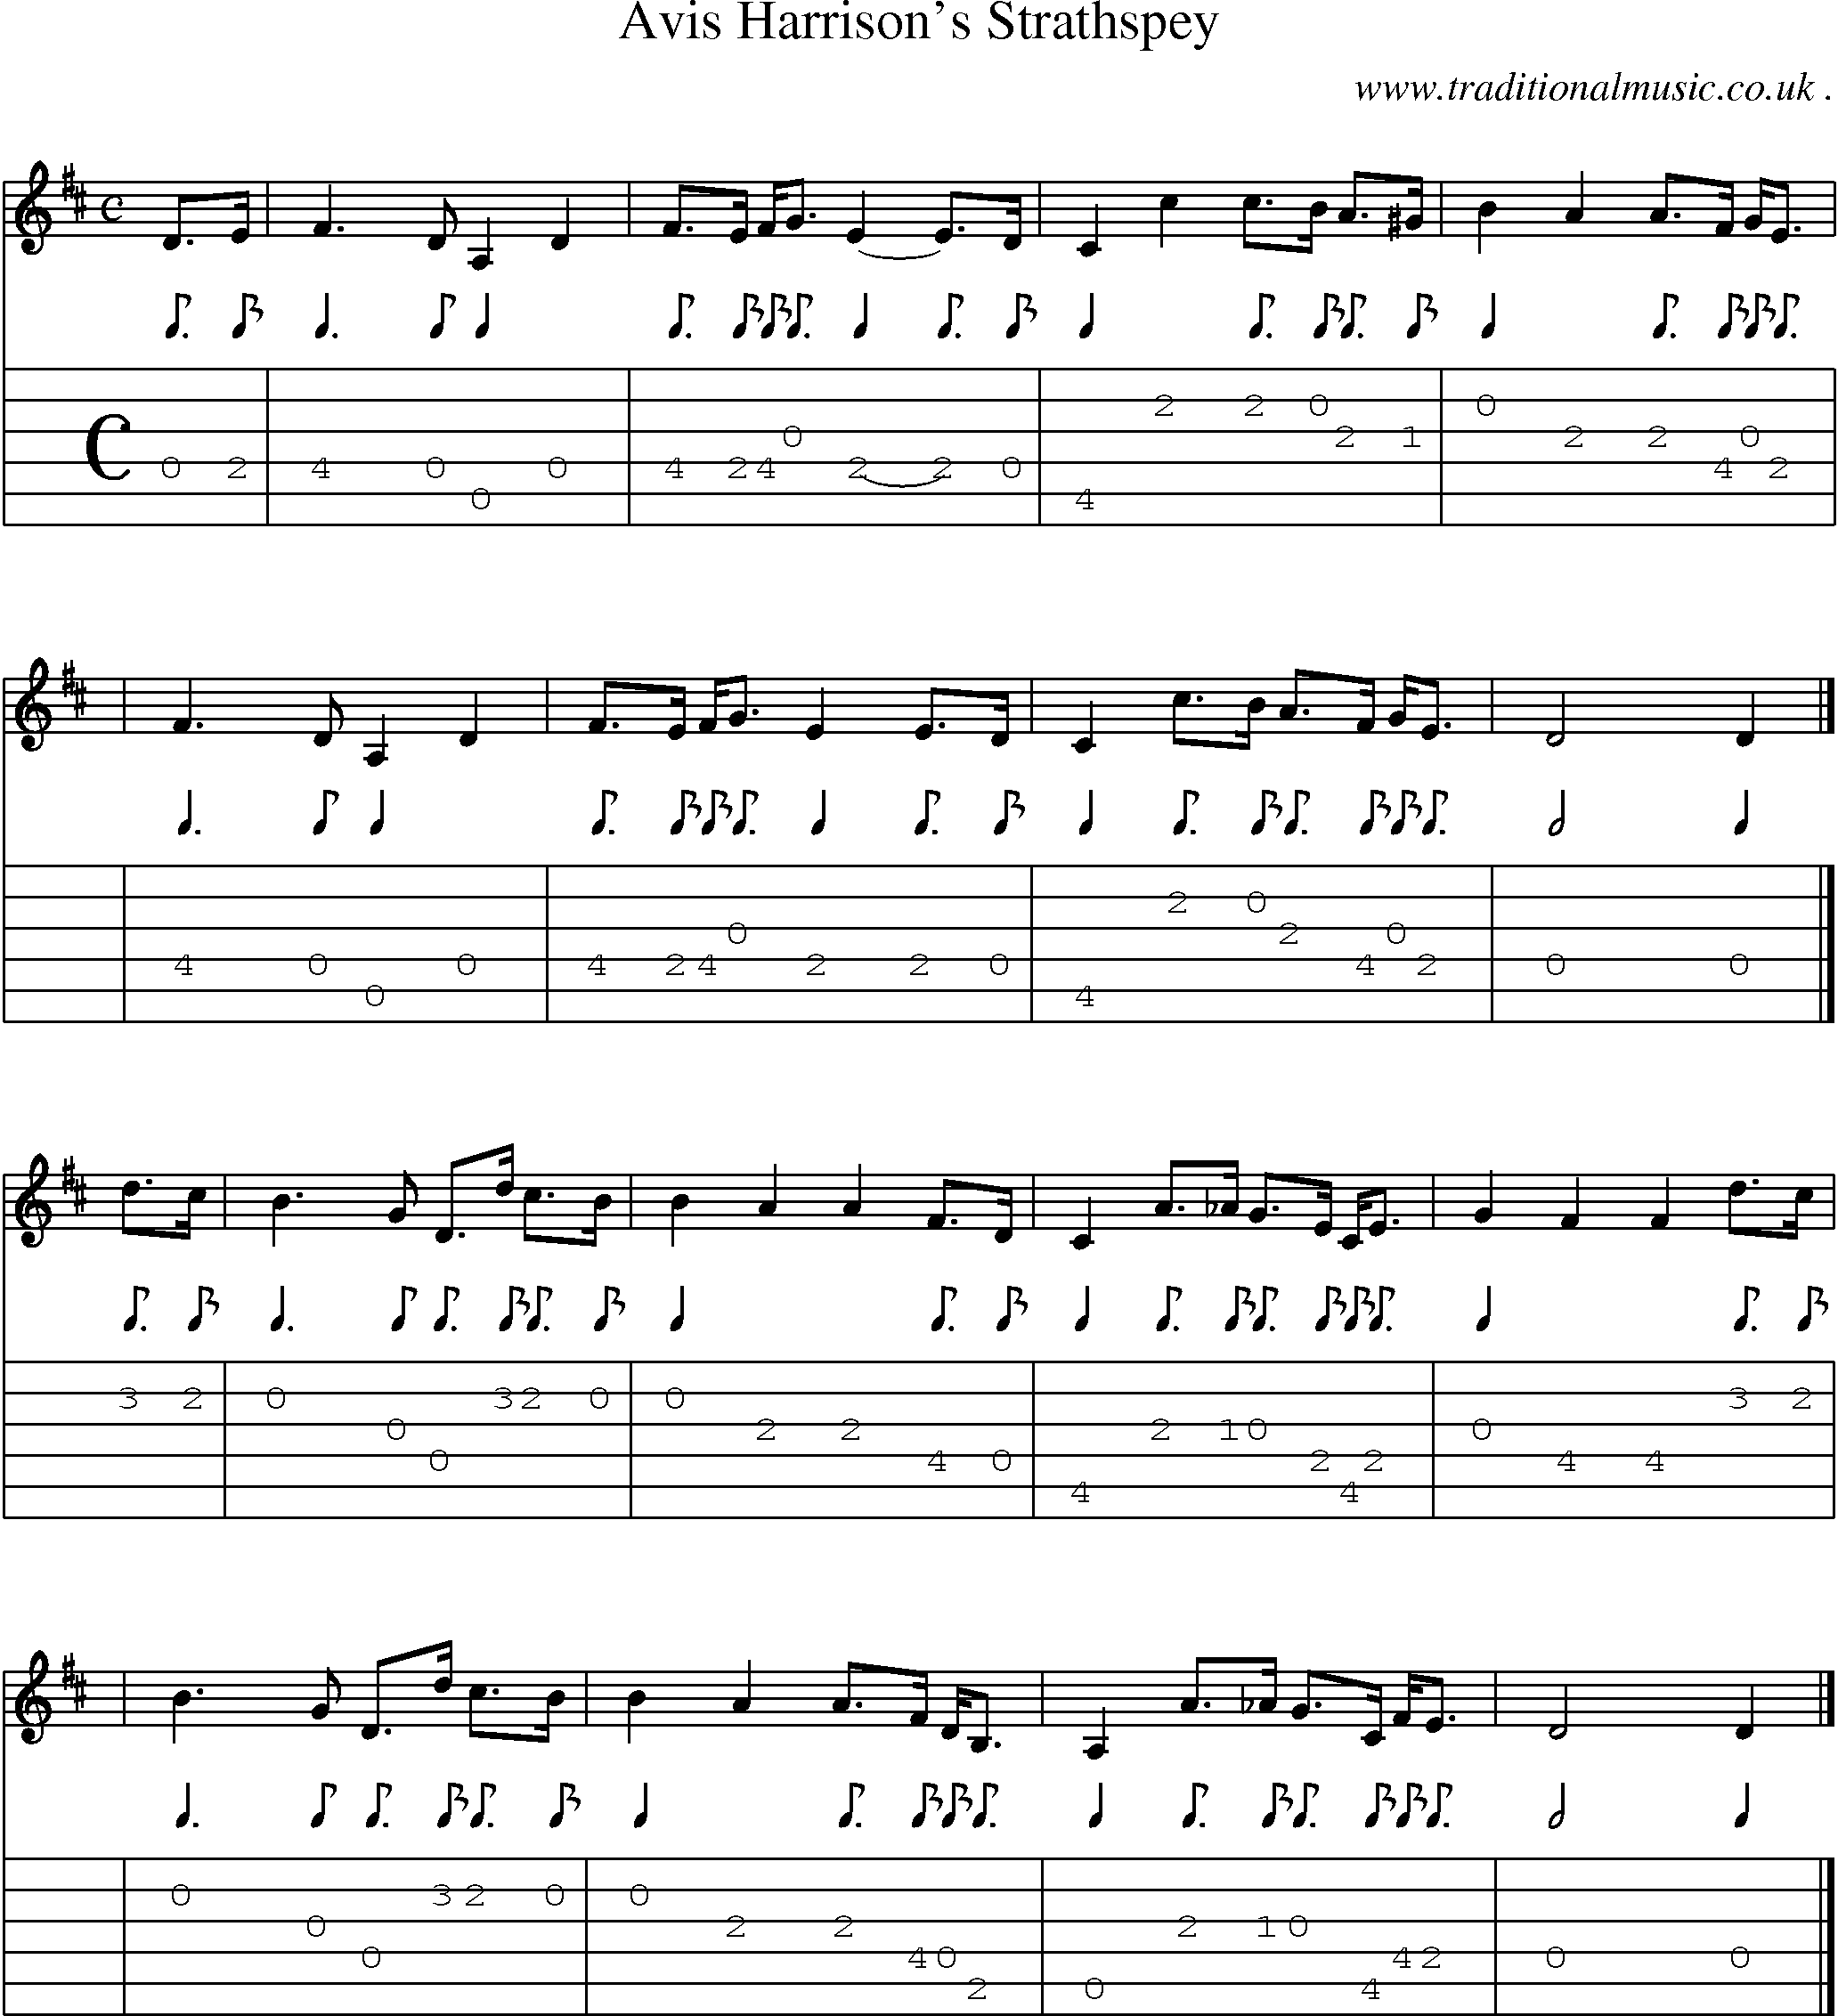 Sheet-music  score, Chords and Guitar Tabs for Avis Harrisons Strathspey